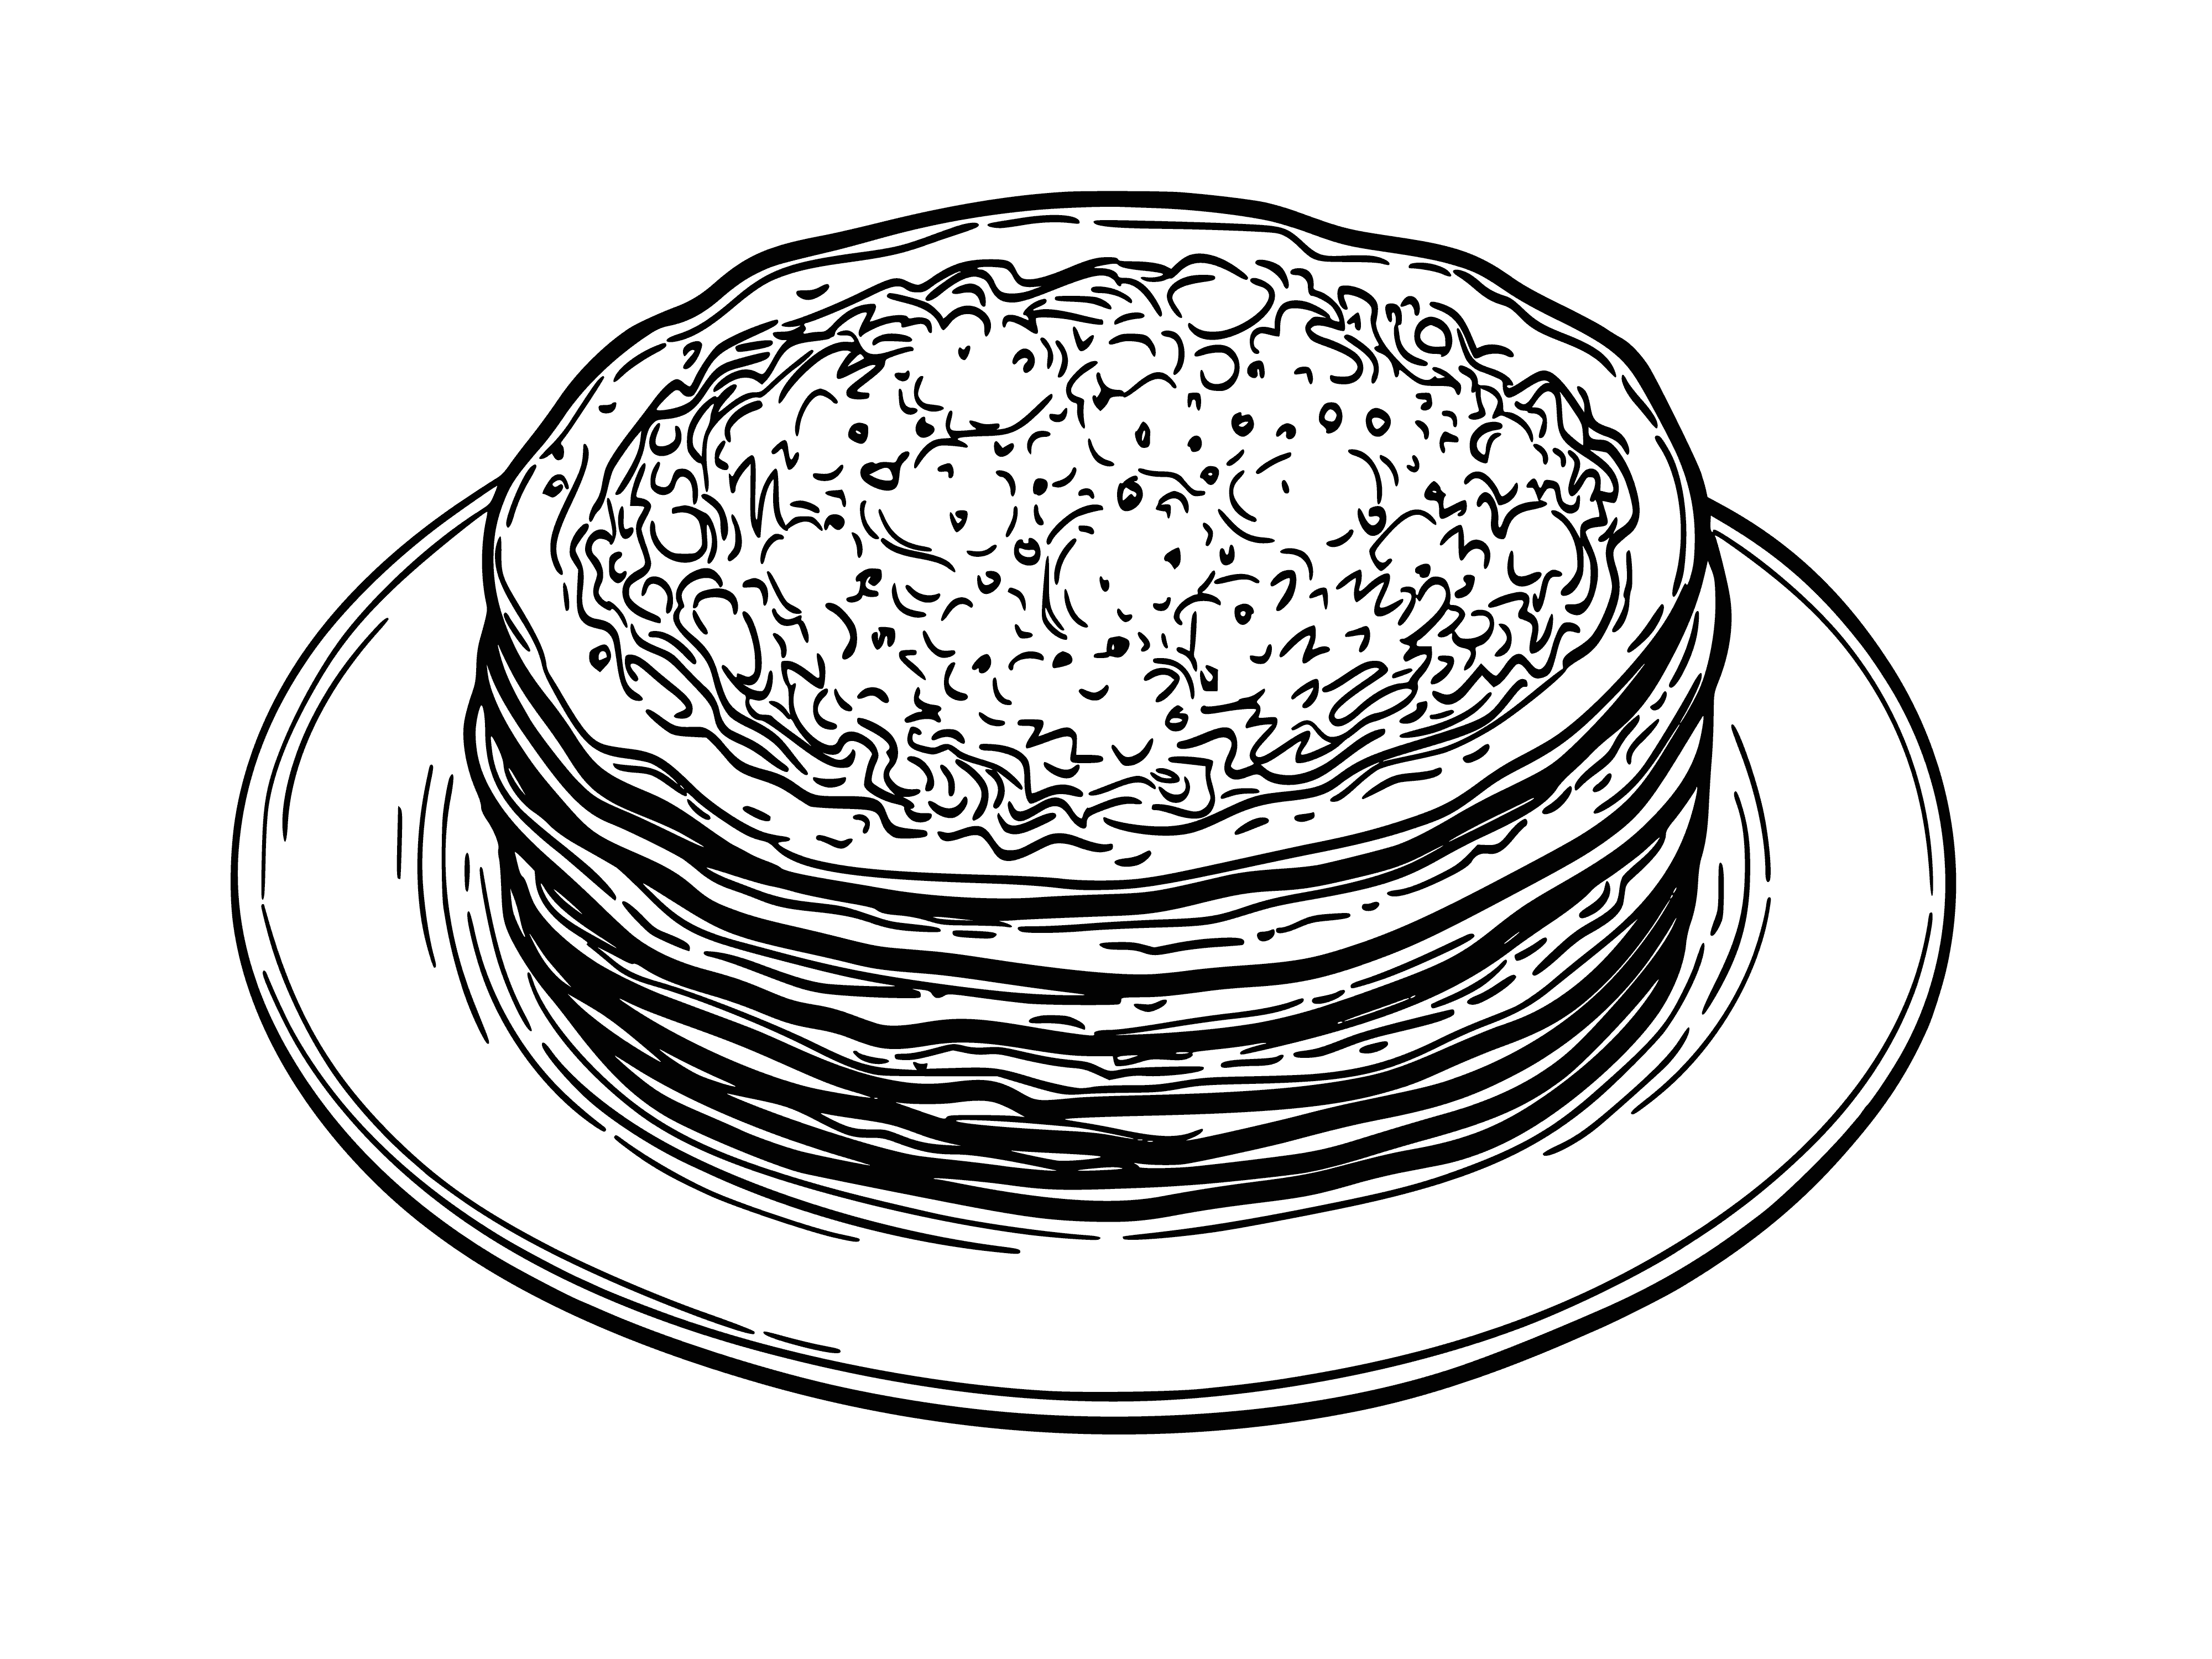 coloring page: Celebrated on Mondays, Pancake week invites people to feast on a variety of pancakes with unique toppings. An occasion for friends and family to relax and enjoy!